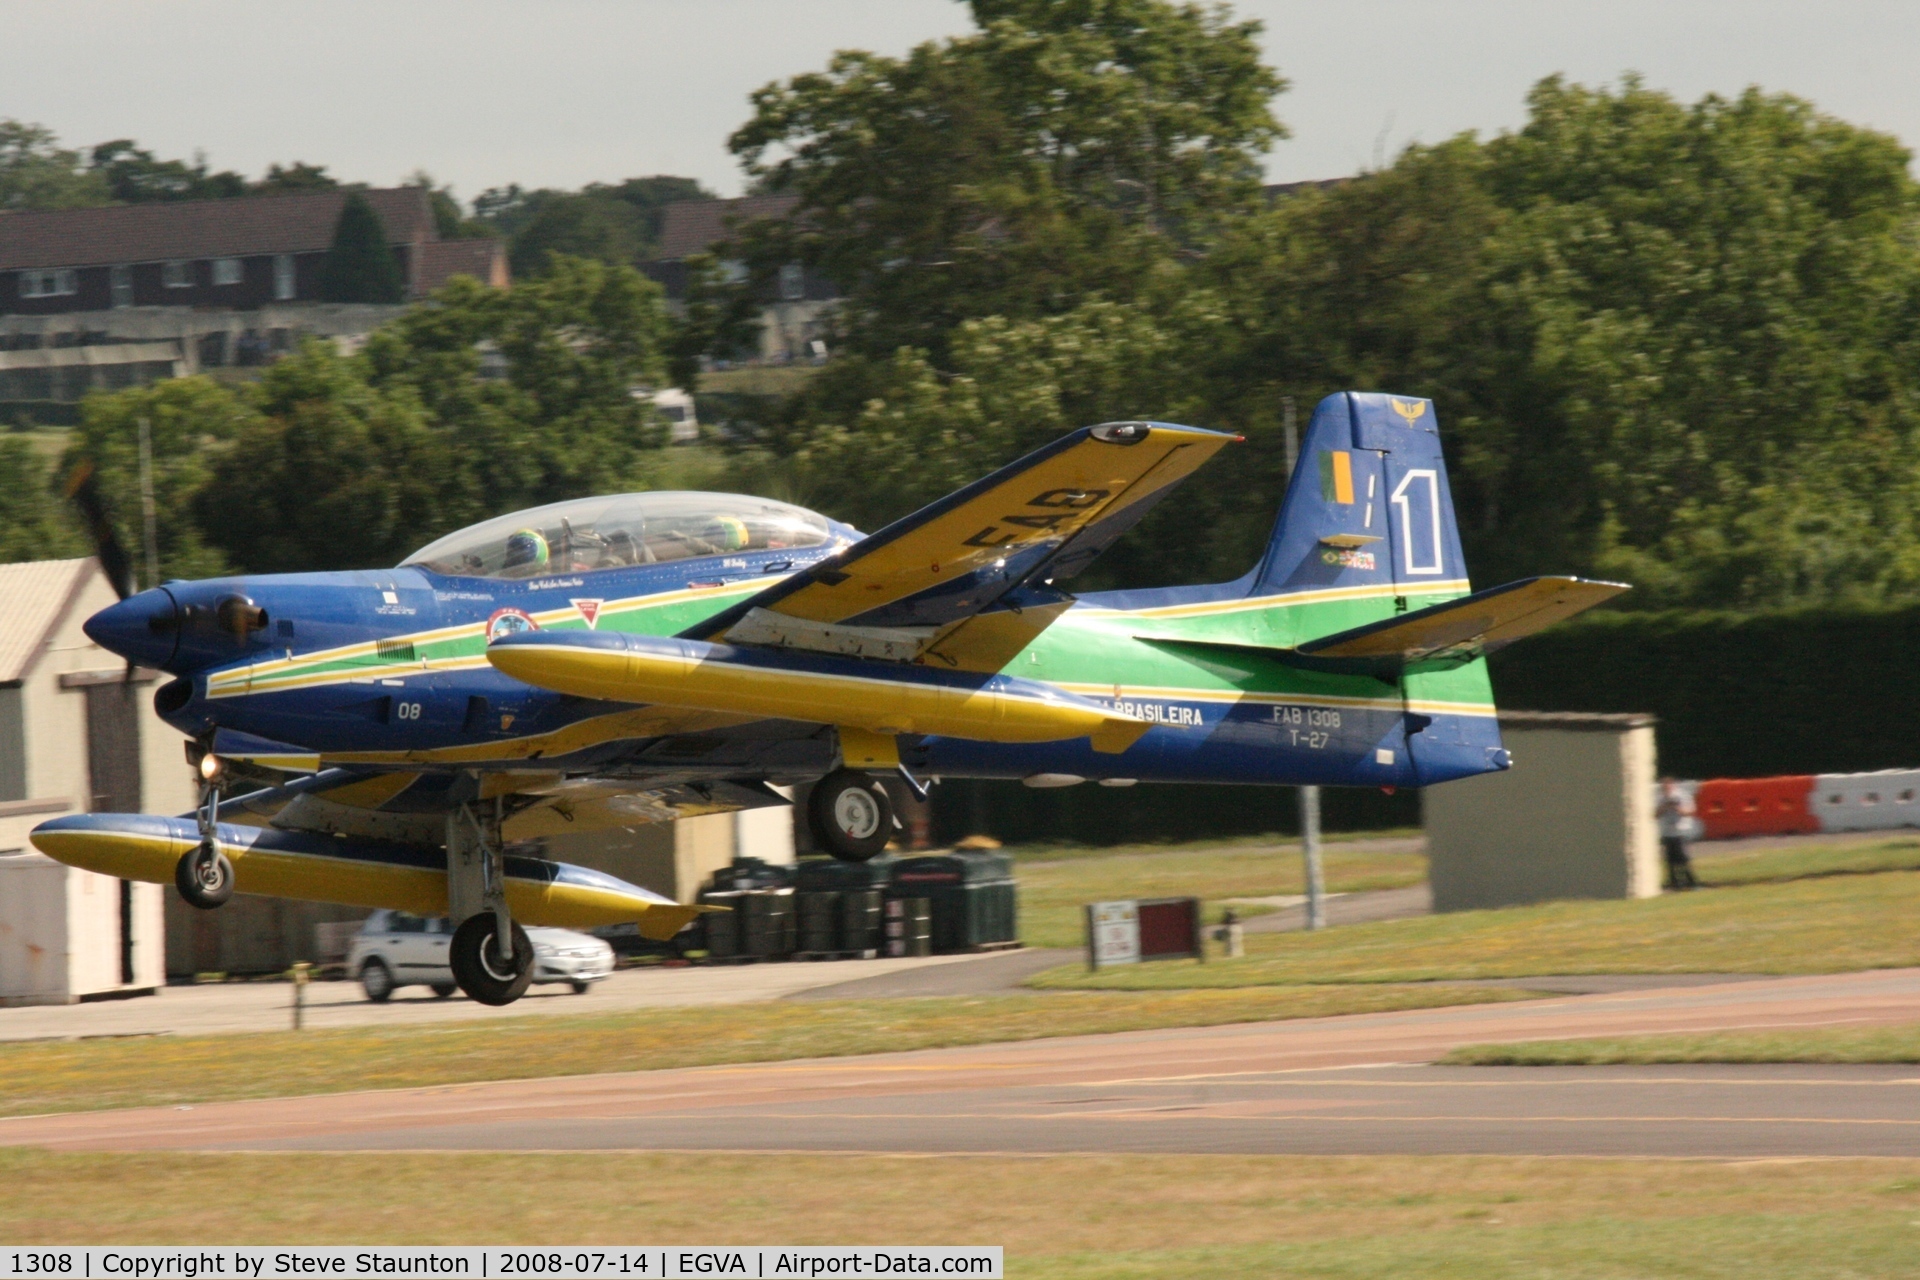 1308, Embraer T-27 Tucano (EMB-312) C/N 312012, Taken at the Royal International Air Tattoo 2008 during arrivals and departures (show days cancelled due to bad weather)